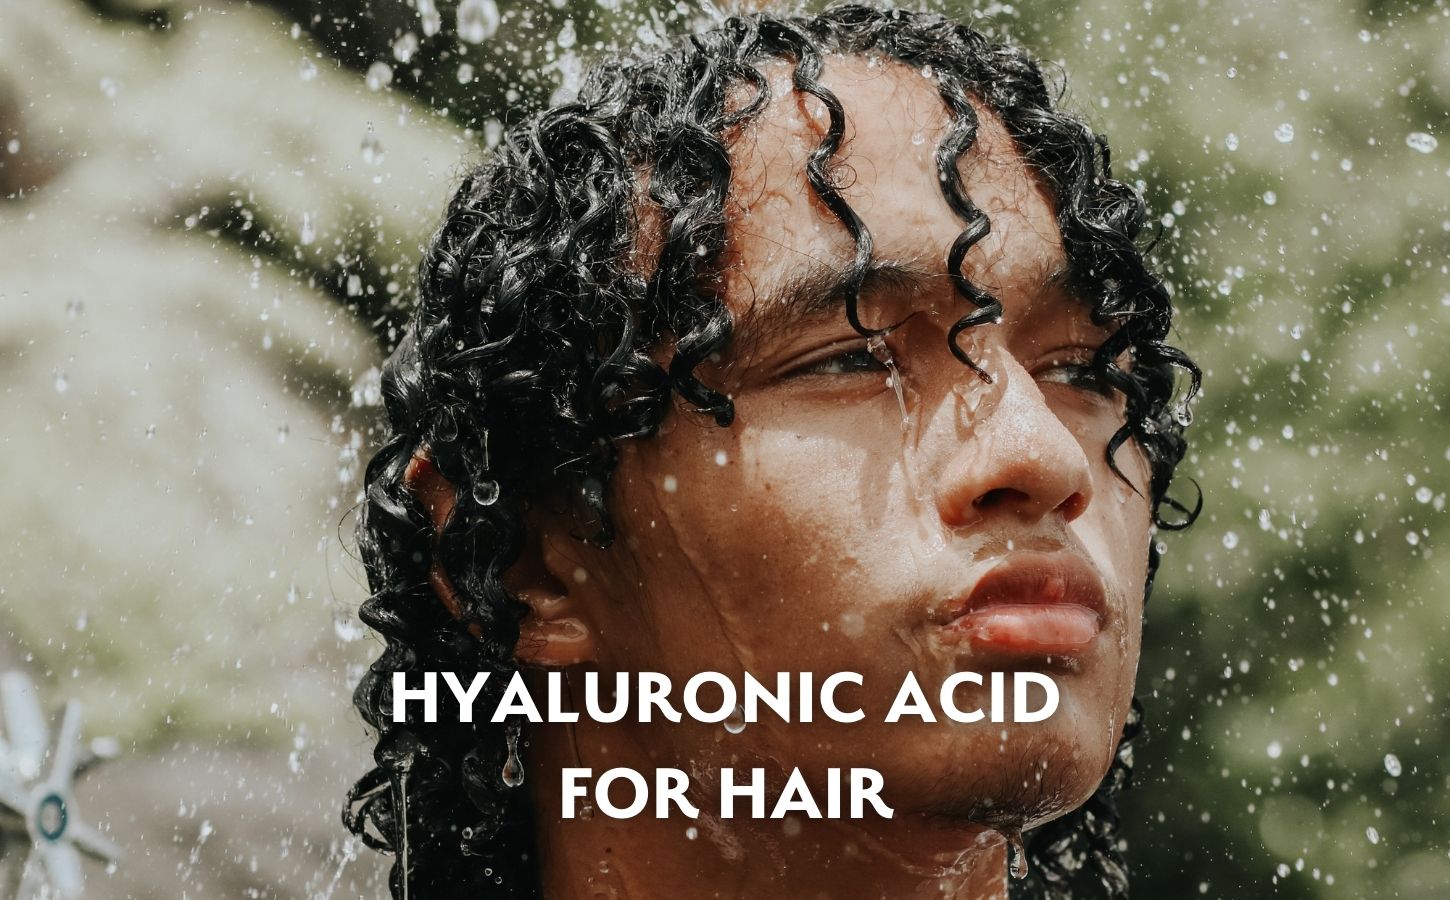 The Wonder and Joys of Hyaluronic Acid for Hair